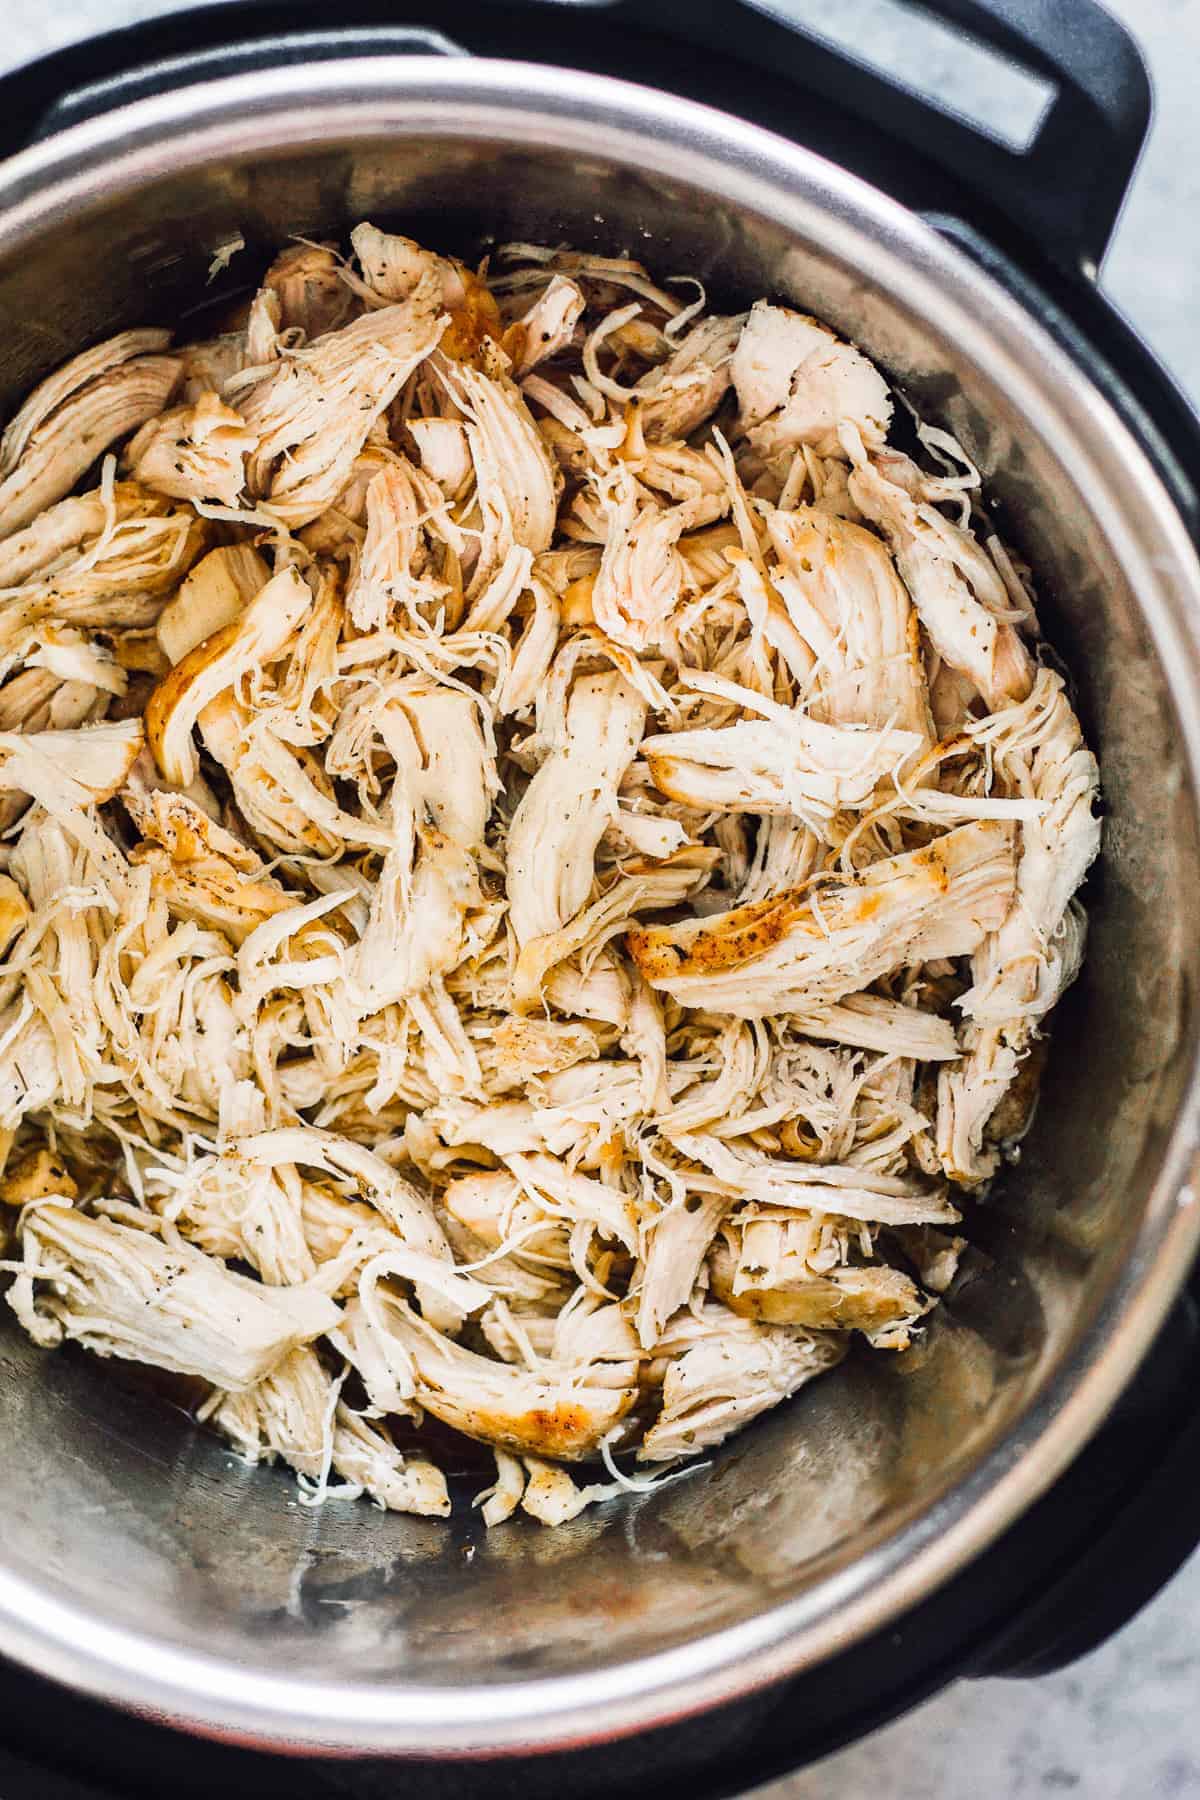 Chicken breasts shredded up in an Instant Pot.